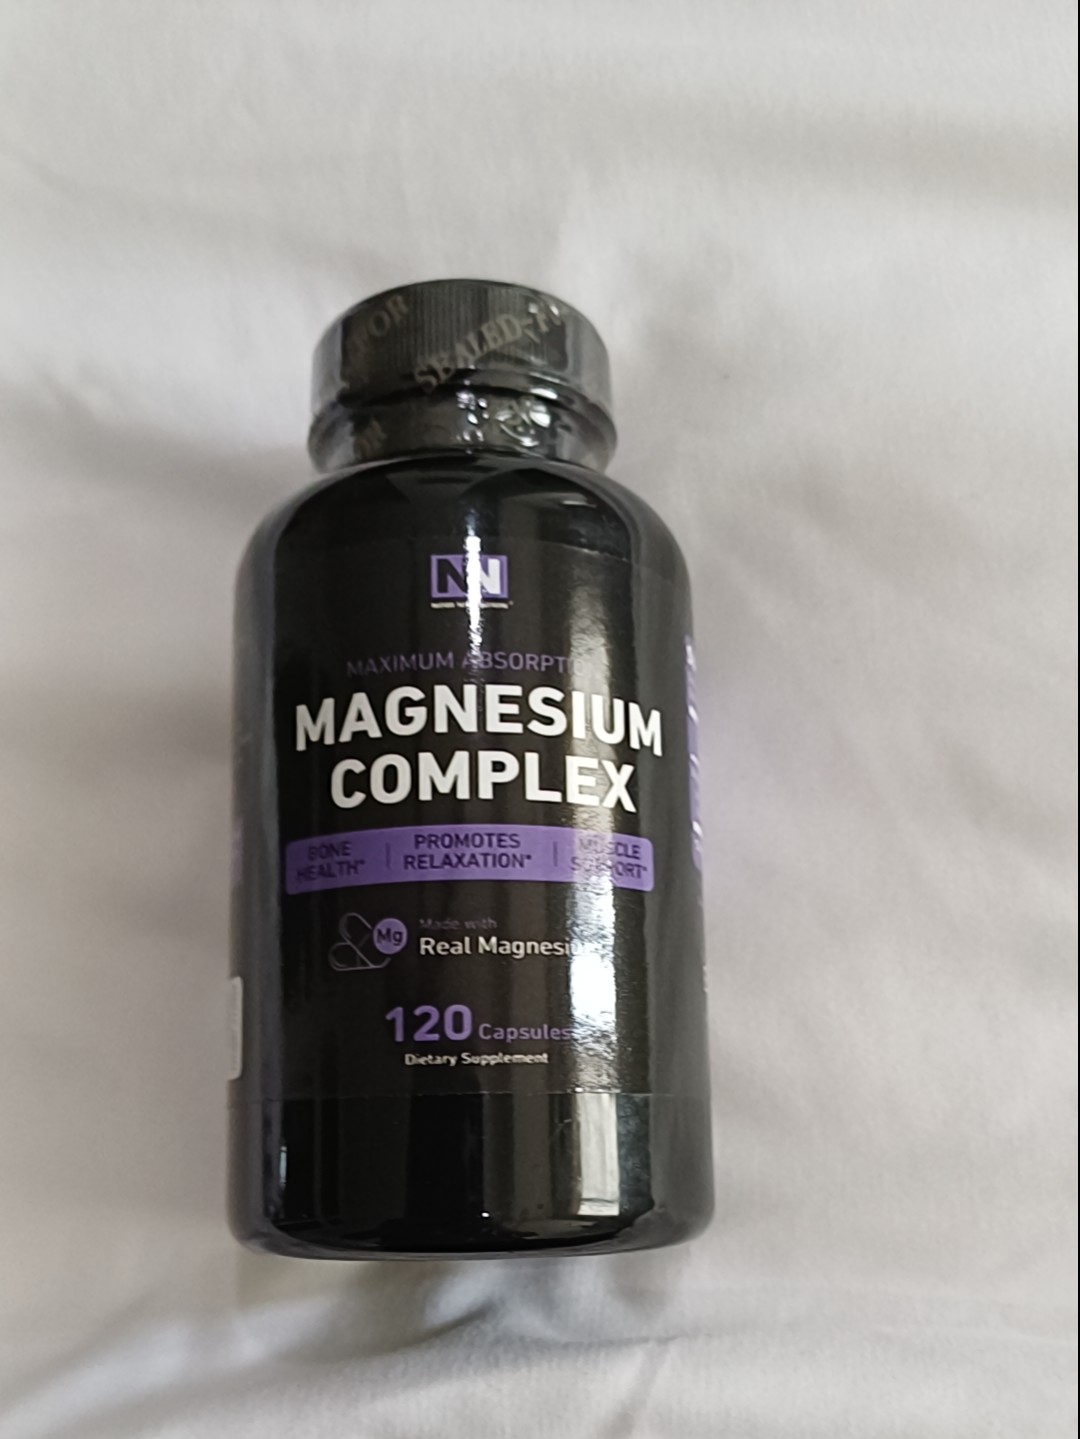 Magnesium Oxide Citrate Complex, High Absorption Non-GMO Gluten Soy and  Dairy Free